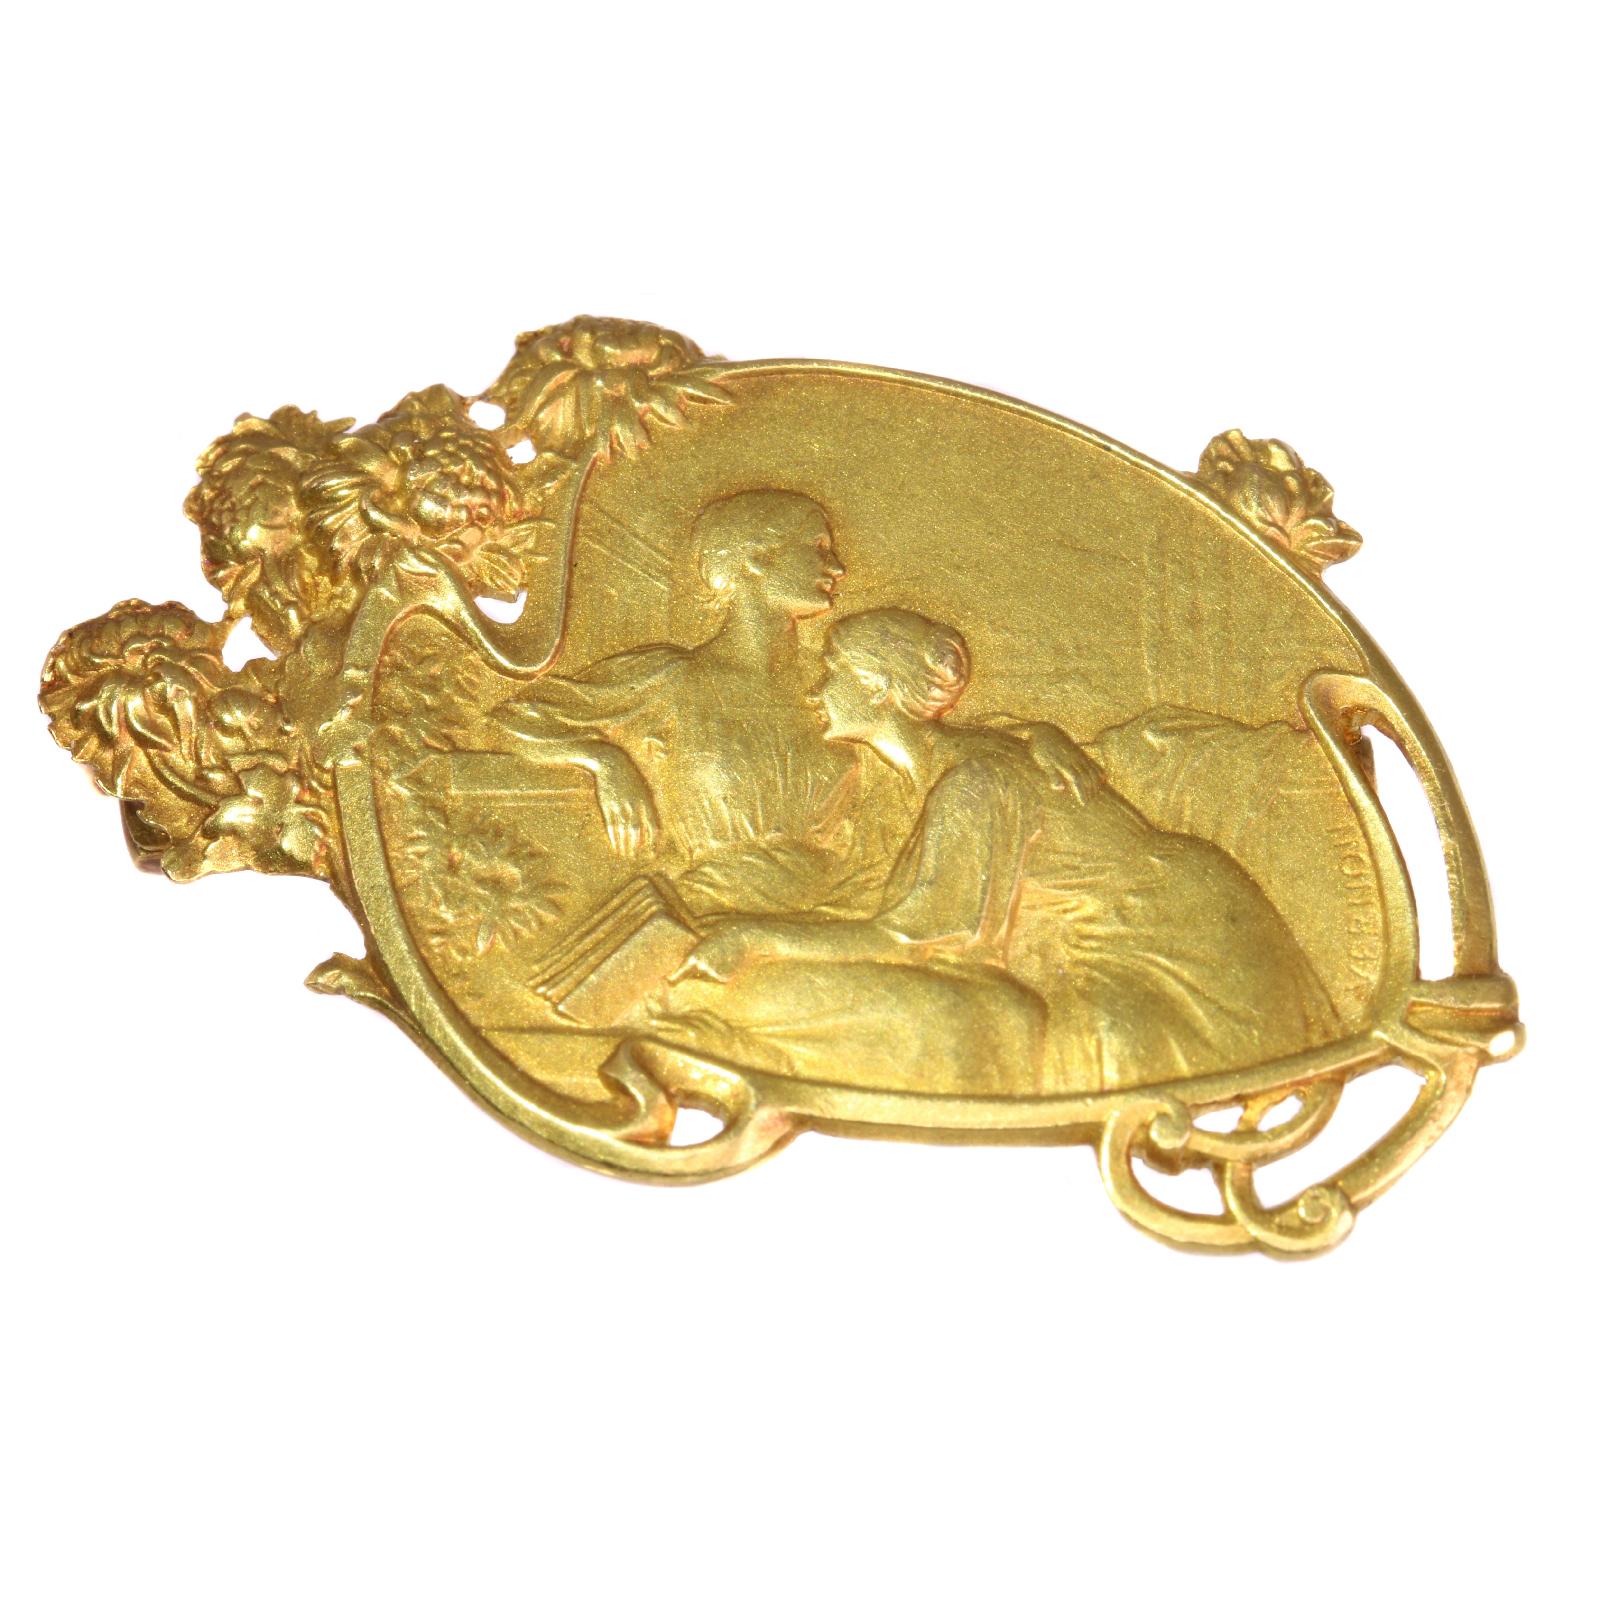 As the established craftsman Vernon is, he must have constructed the idyllic scenery of this 18K yellow gold French Art Nouveau brooch fully out of symbols. On the background, we notice cypresses as a symbol of mourning. On the front, we believe to